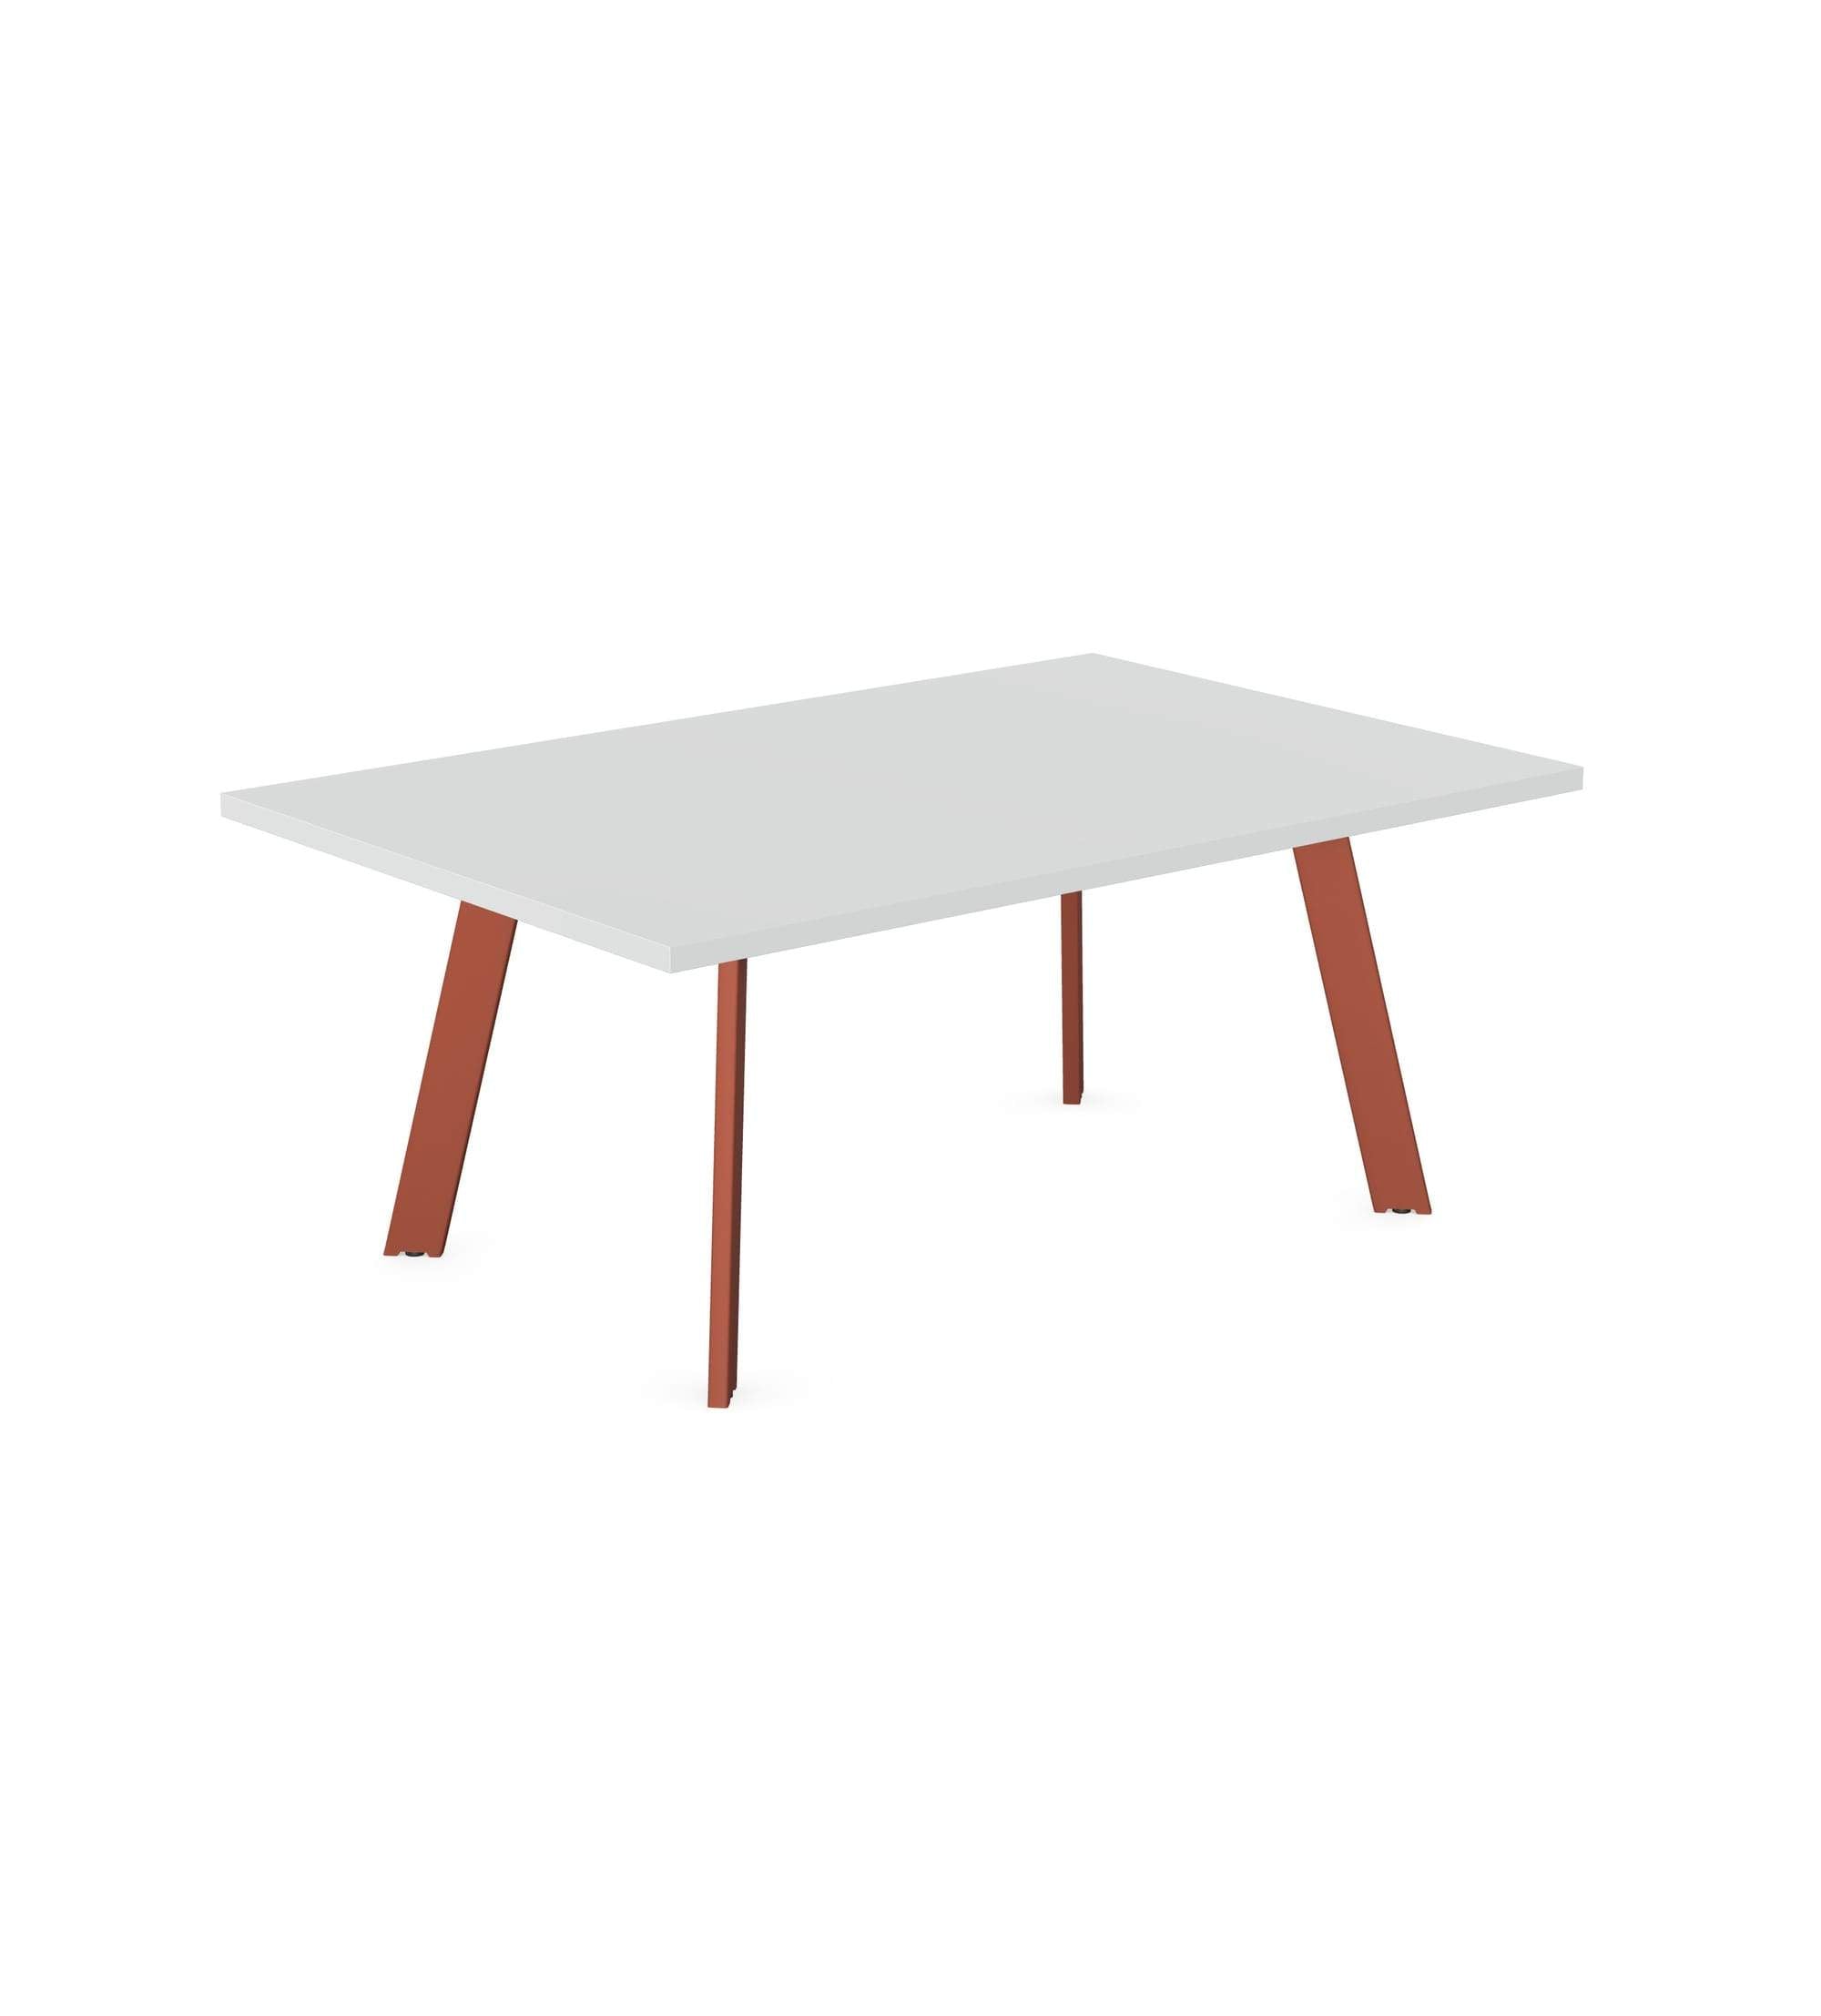 Axy-Line - Low Occasional Tables, Rectangular Tops, Leg-A